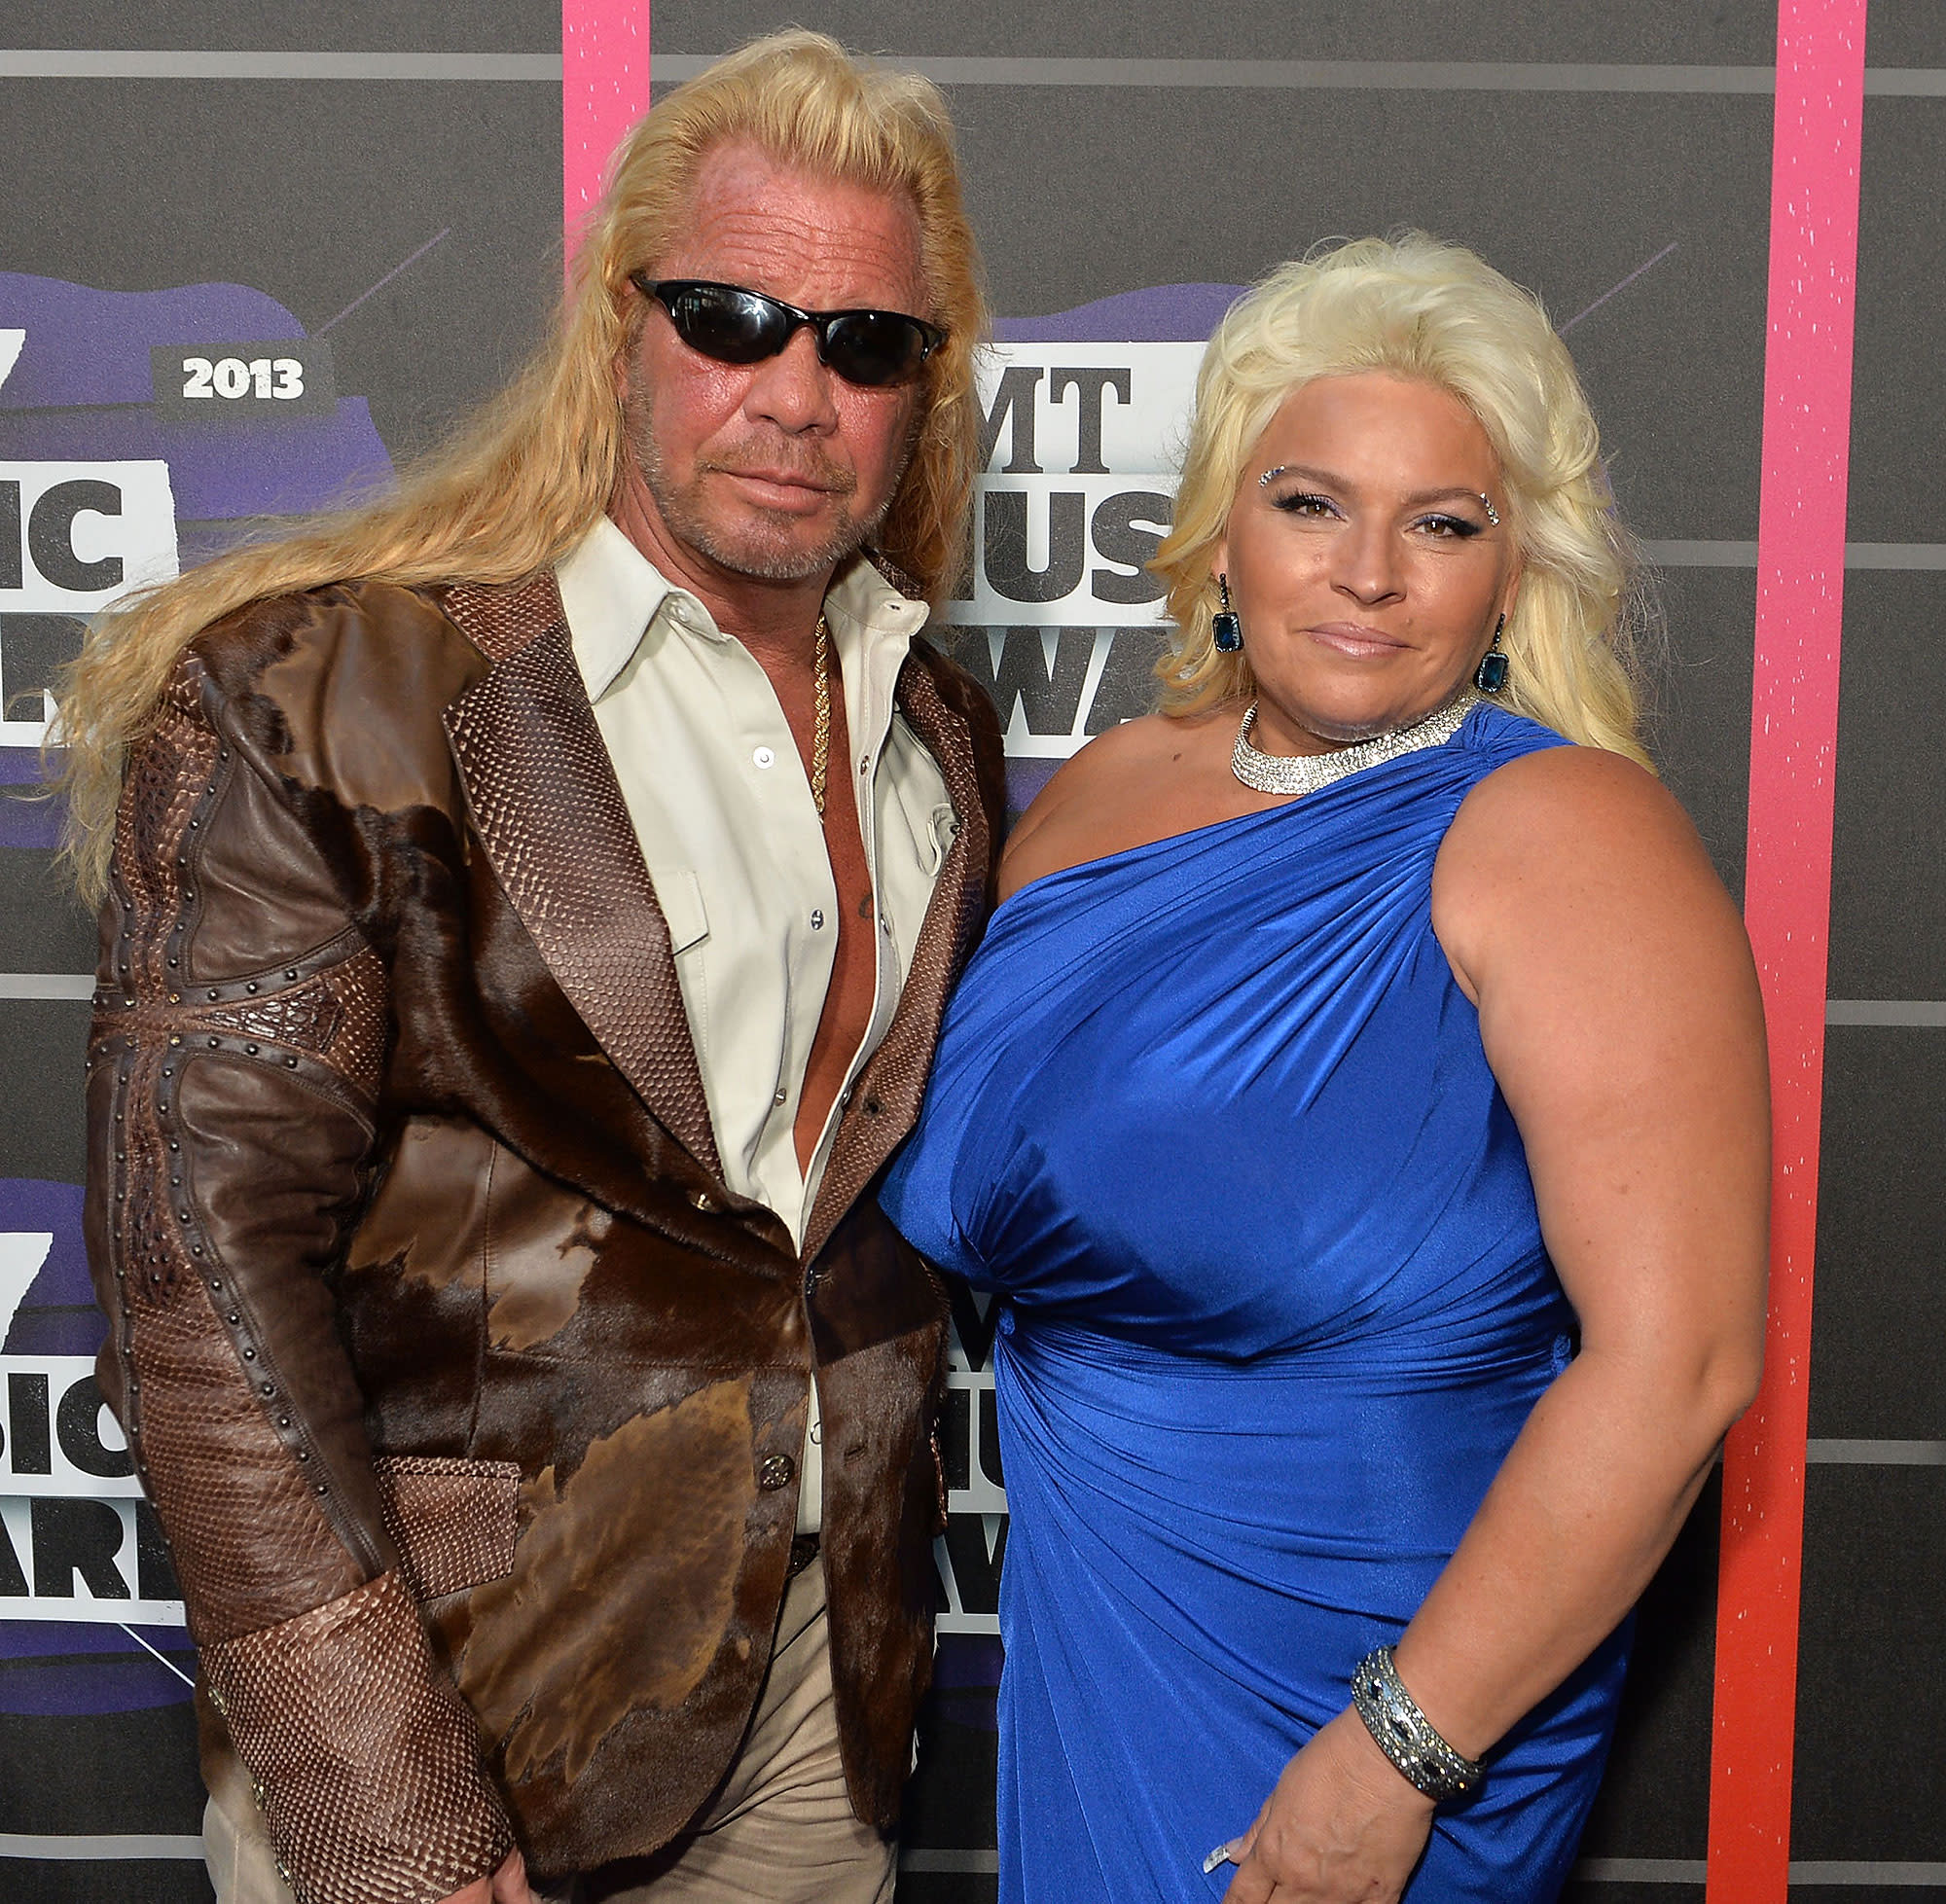 Dog the Bounty Hunter's Wife Beth Chapman Does Not Want Pity As She